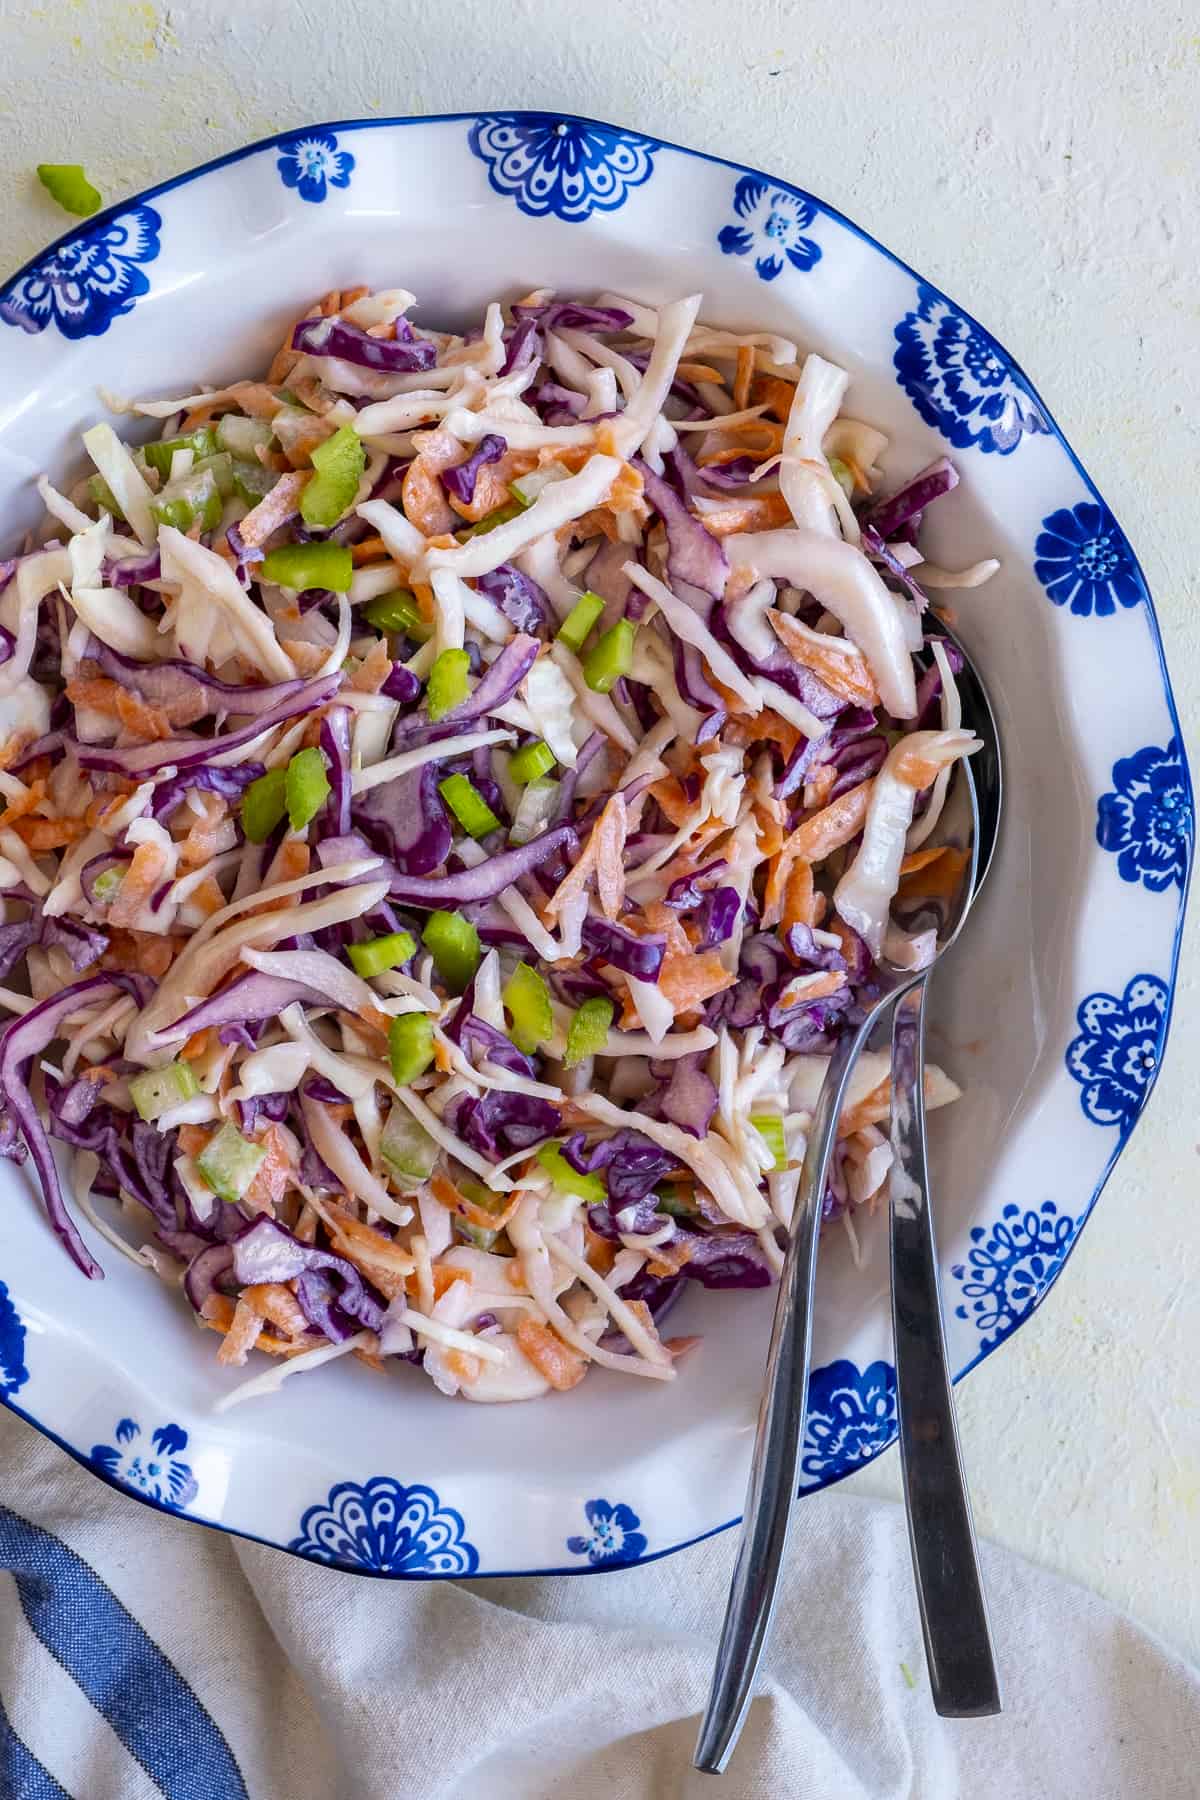 Yogurt coleslaw in a white bowl and two spoons inside it.